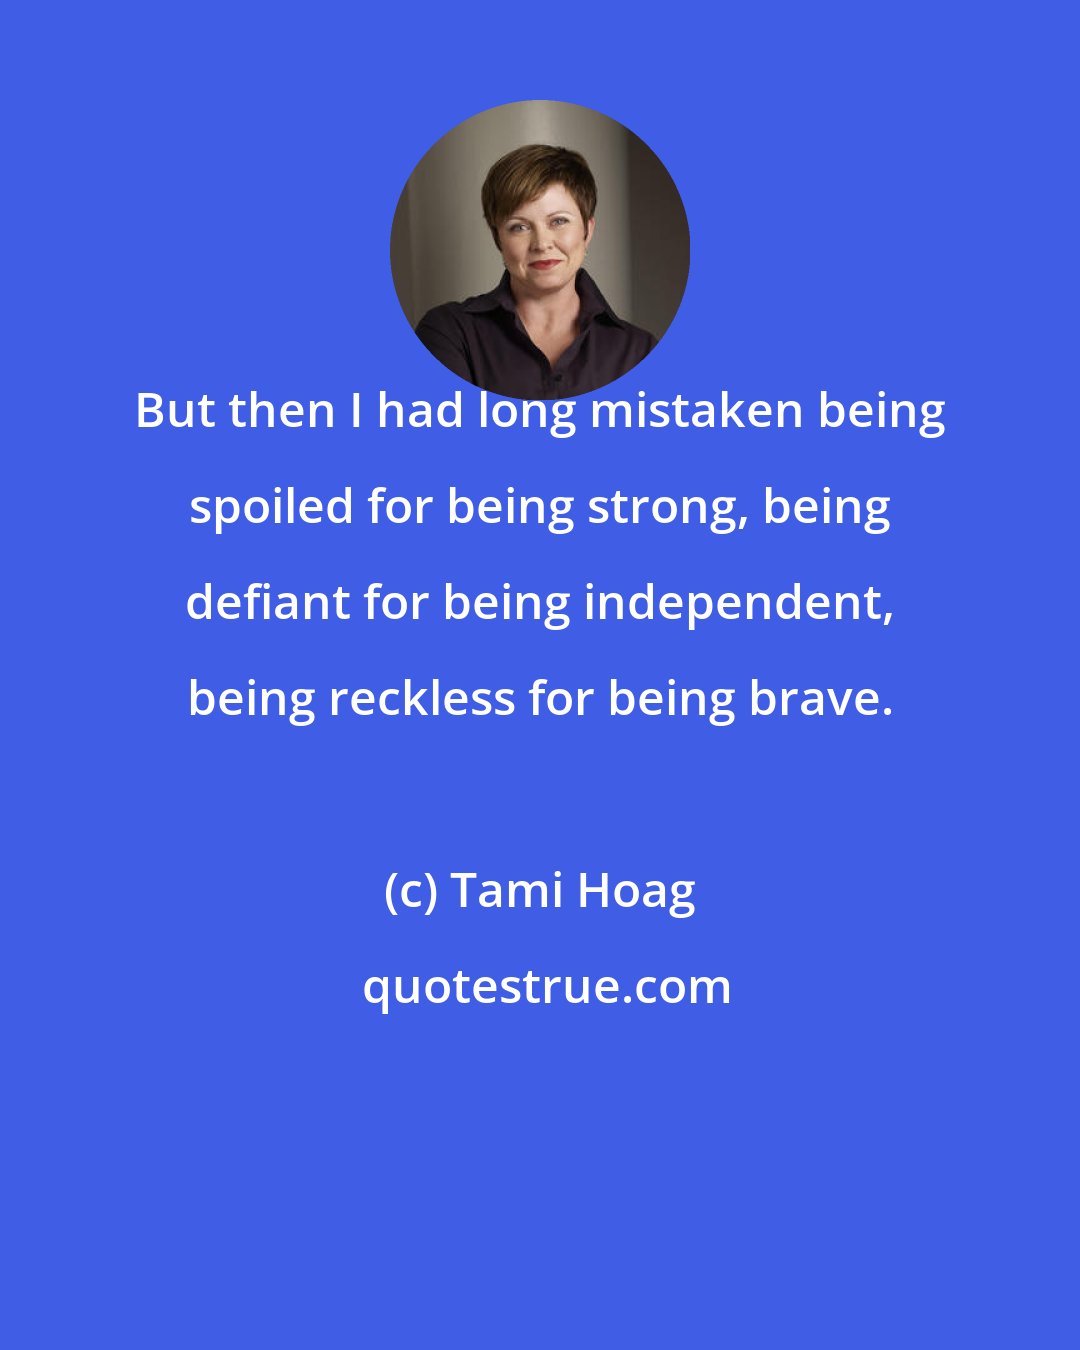 Tami Hoag: But then I had long mistaken being spoiled for being strong, being defiant for being independent, being reckless for being brave.